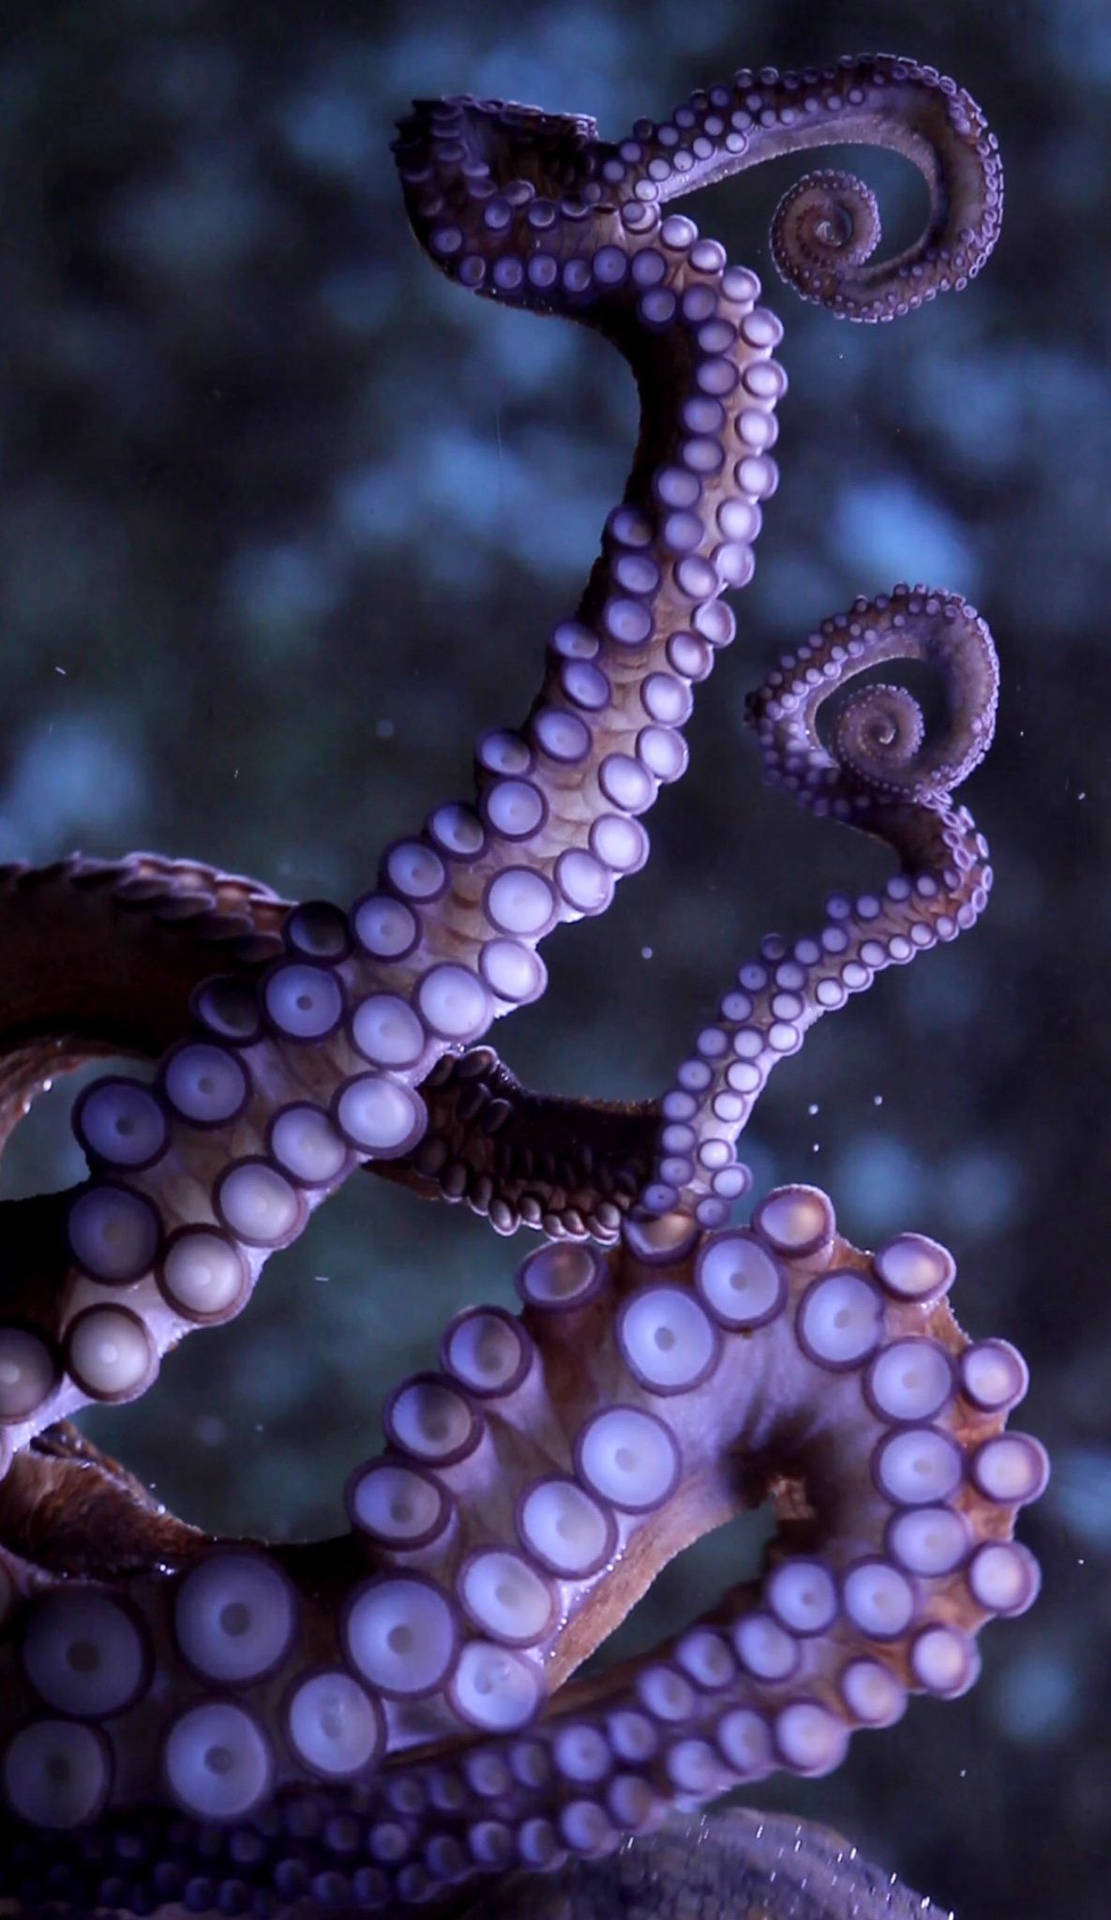 A tentacle of a live octopus reaches out from its intertidal rocky home. Wallpaper